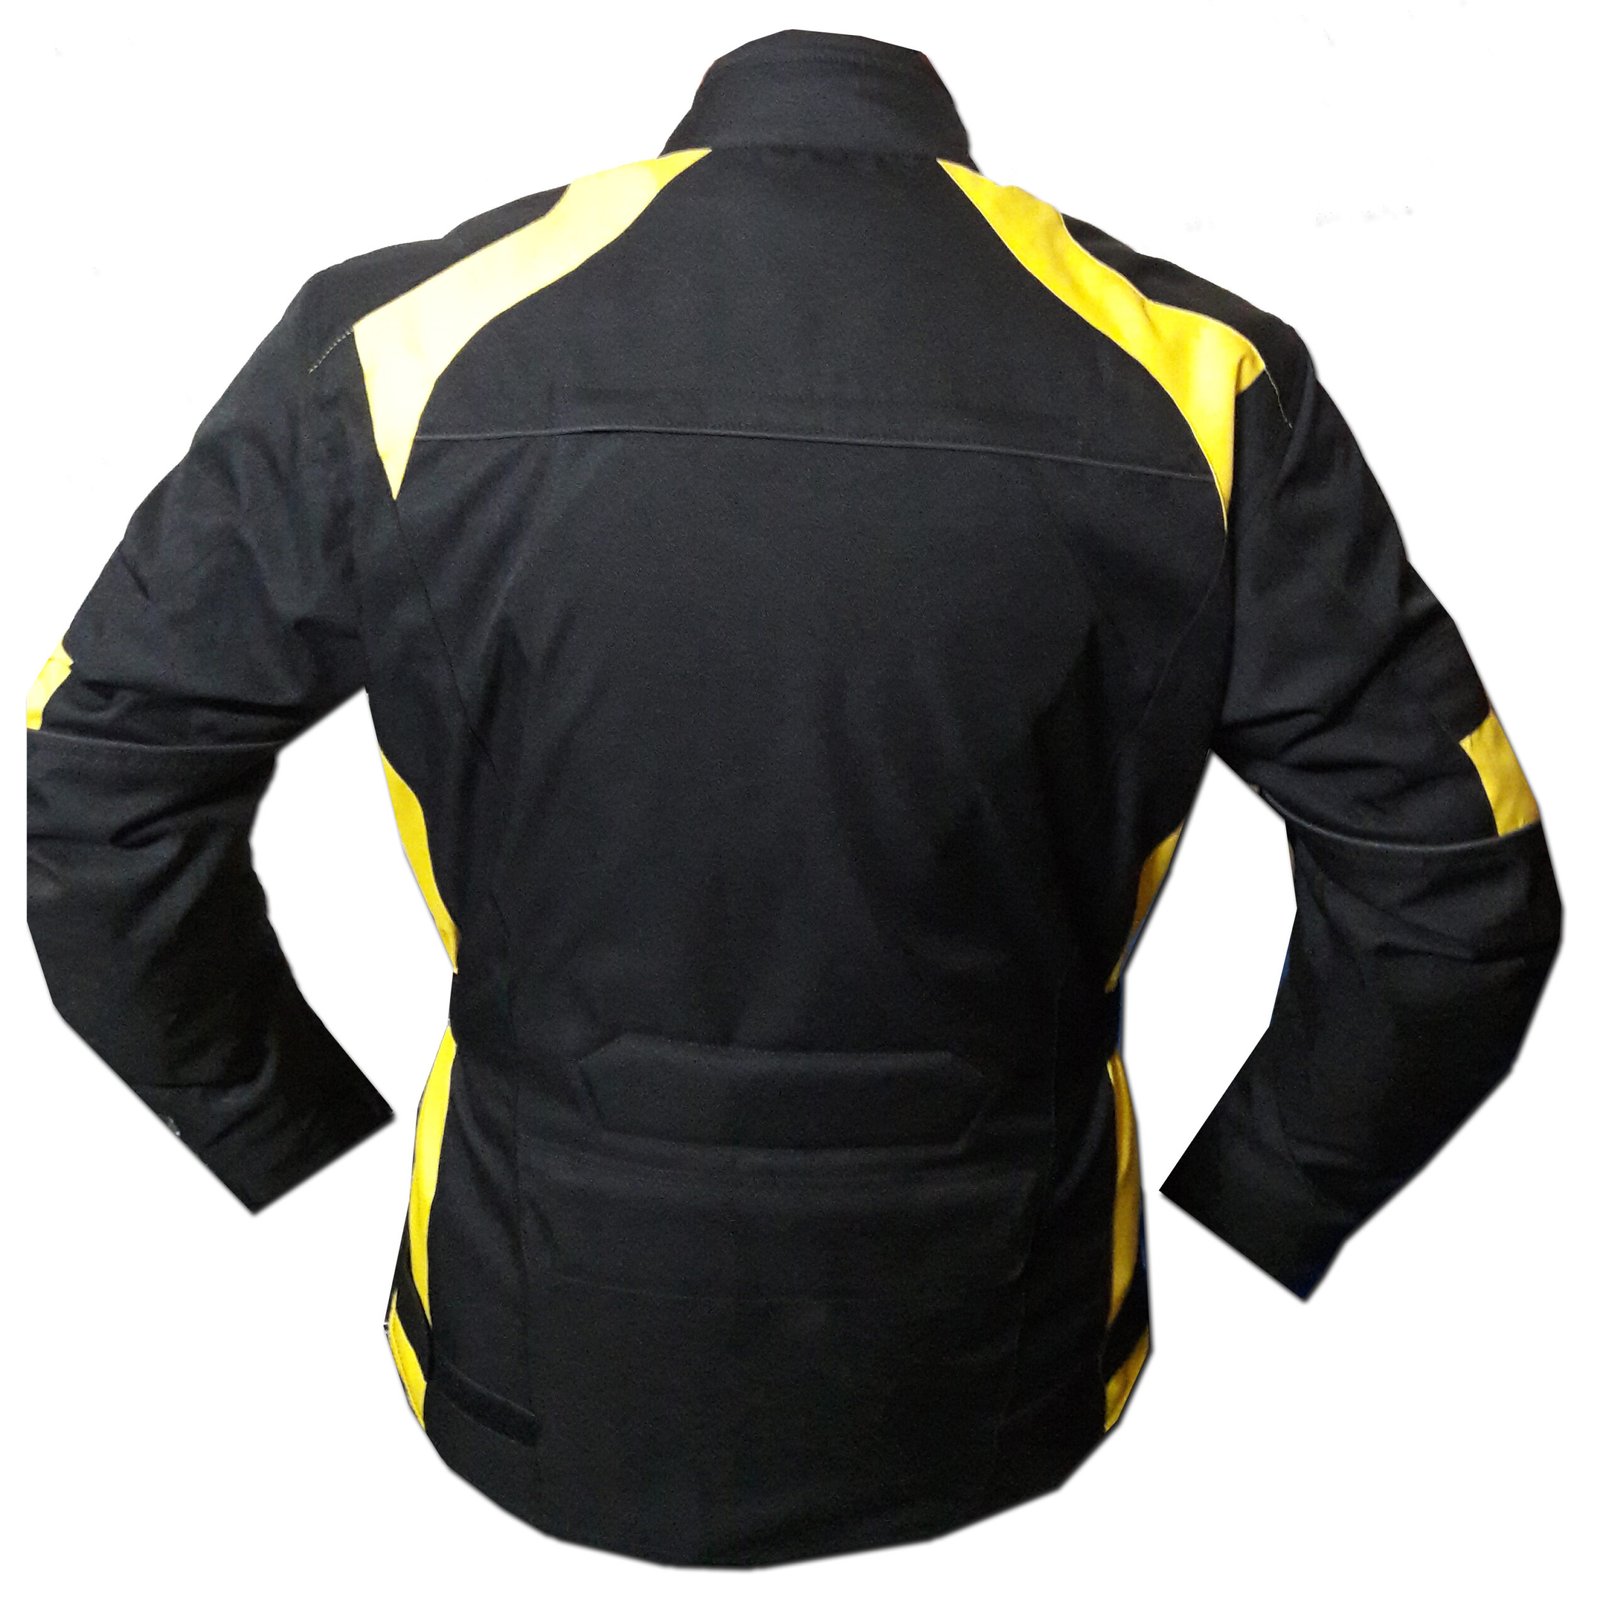 Buy Black and Yellow Motorcycle Touring Jackets